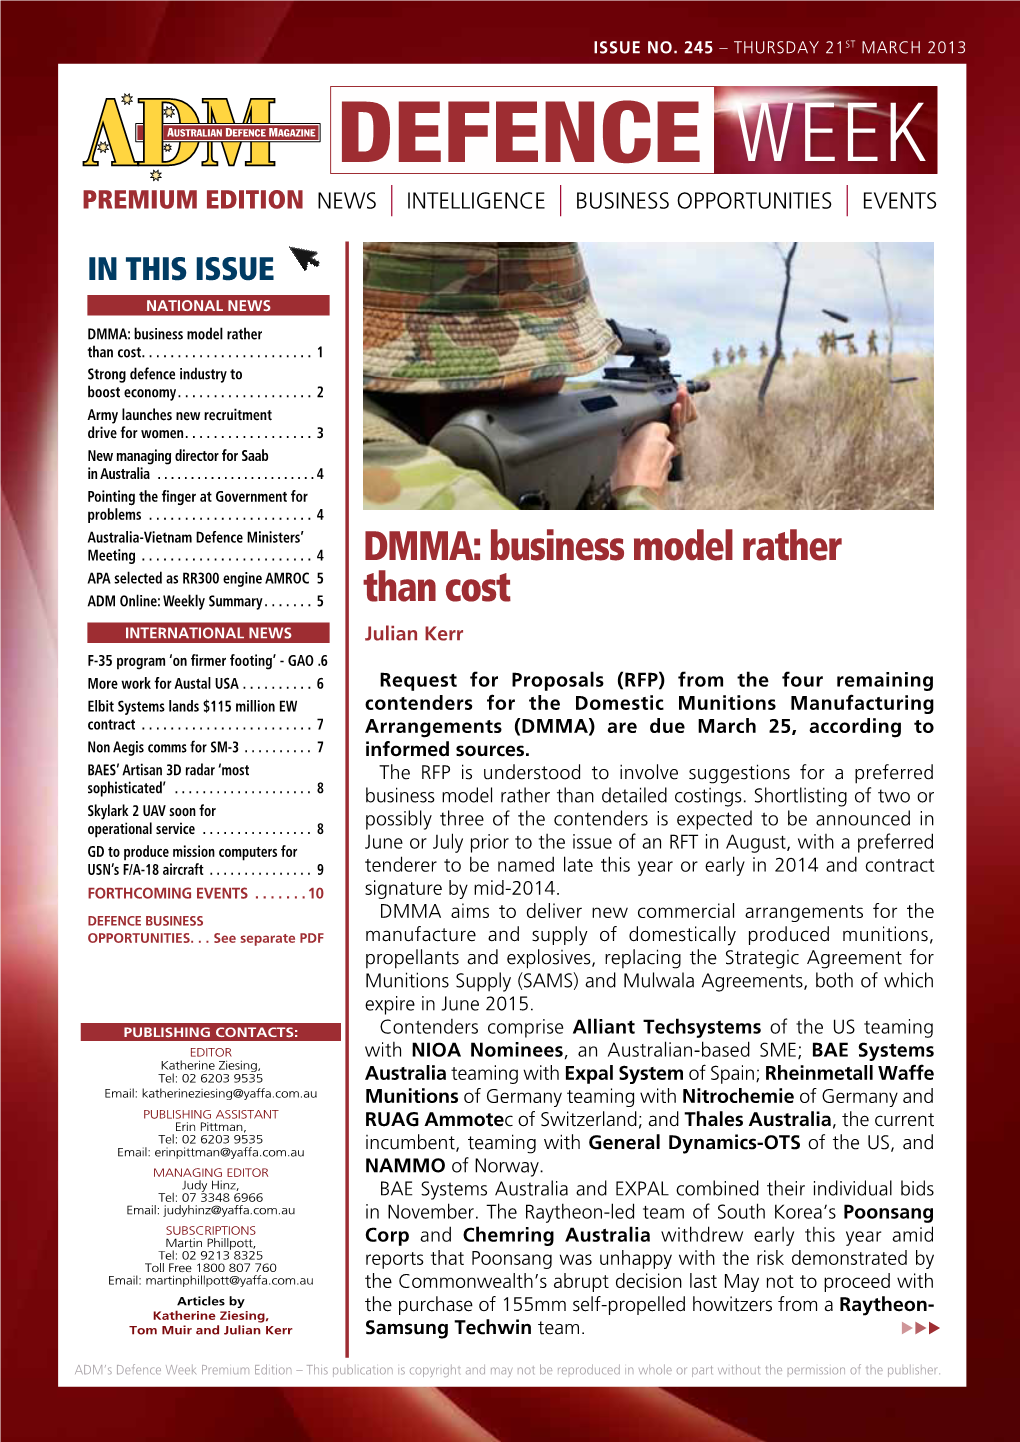 DMMA: Business Model Rather Than Cost